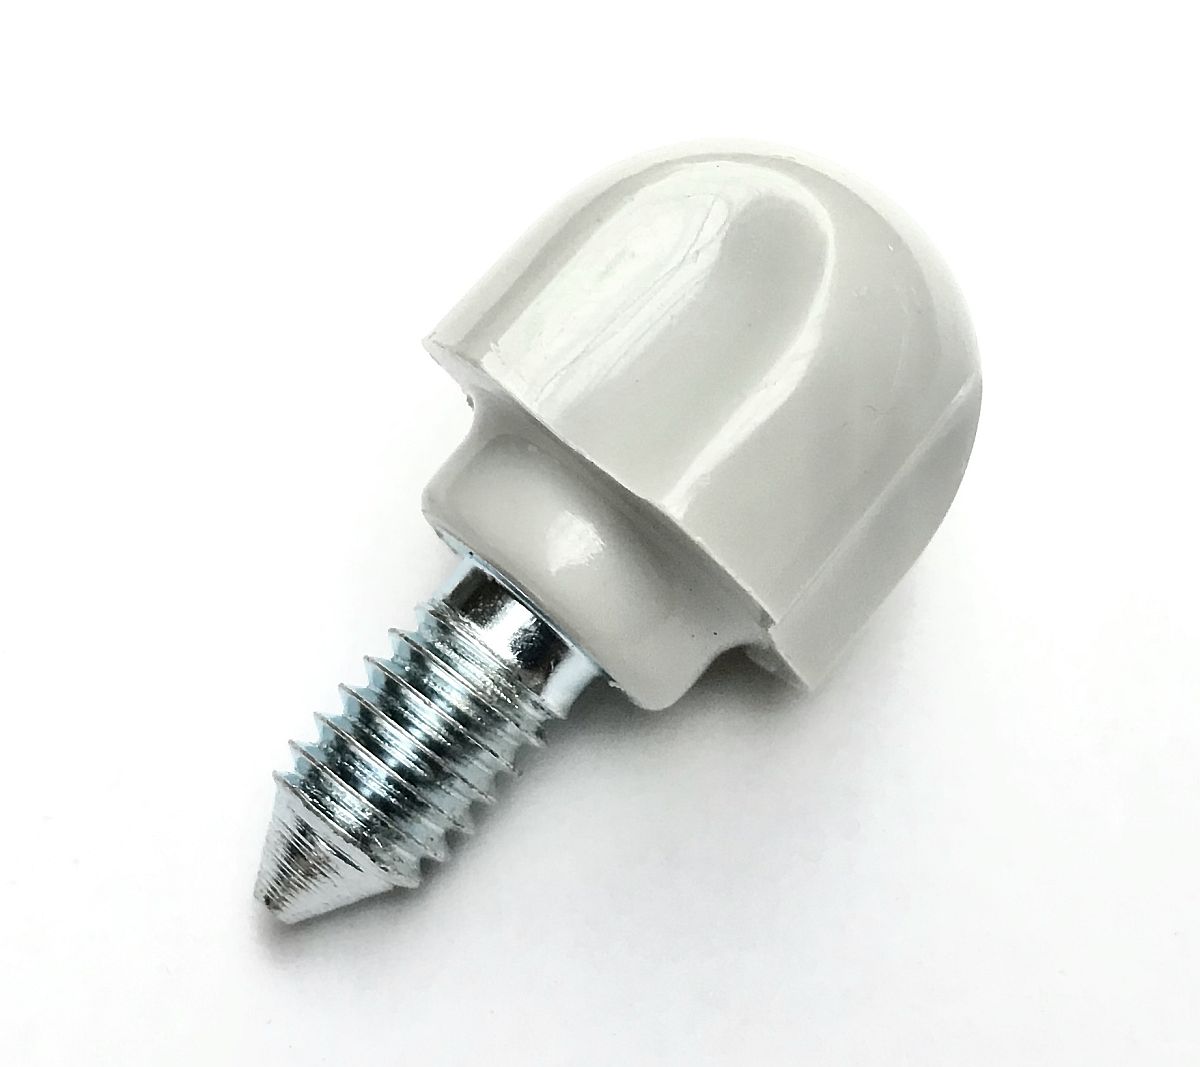 Mixer Knob for Kitchenaid Replacement Parts,As Kitchenaid Mixer Replacement, Mixer Screw Attachment for Kitchenaid Stand Mixer 2